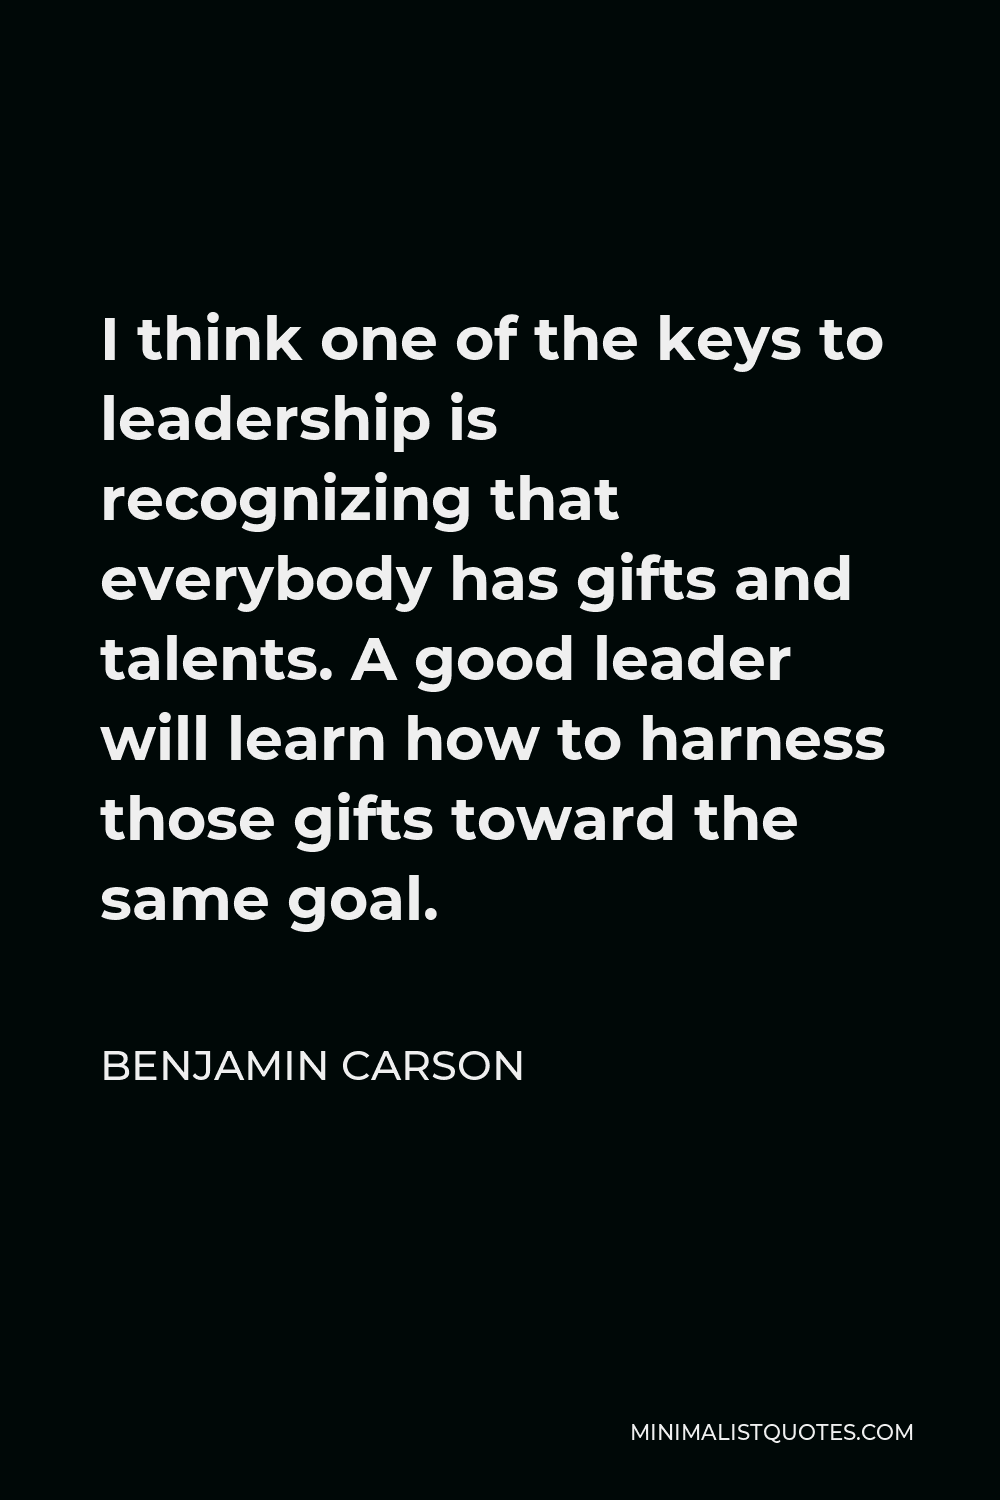 Benjamin Carson Quote - I think one of the keys to leadership is recognizing that everybody has gifts and talents. A good leader will learn how to harness those gifts toward the same goal.